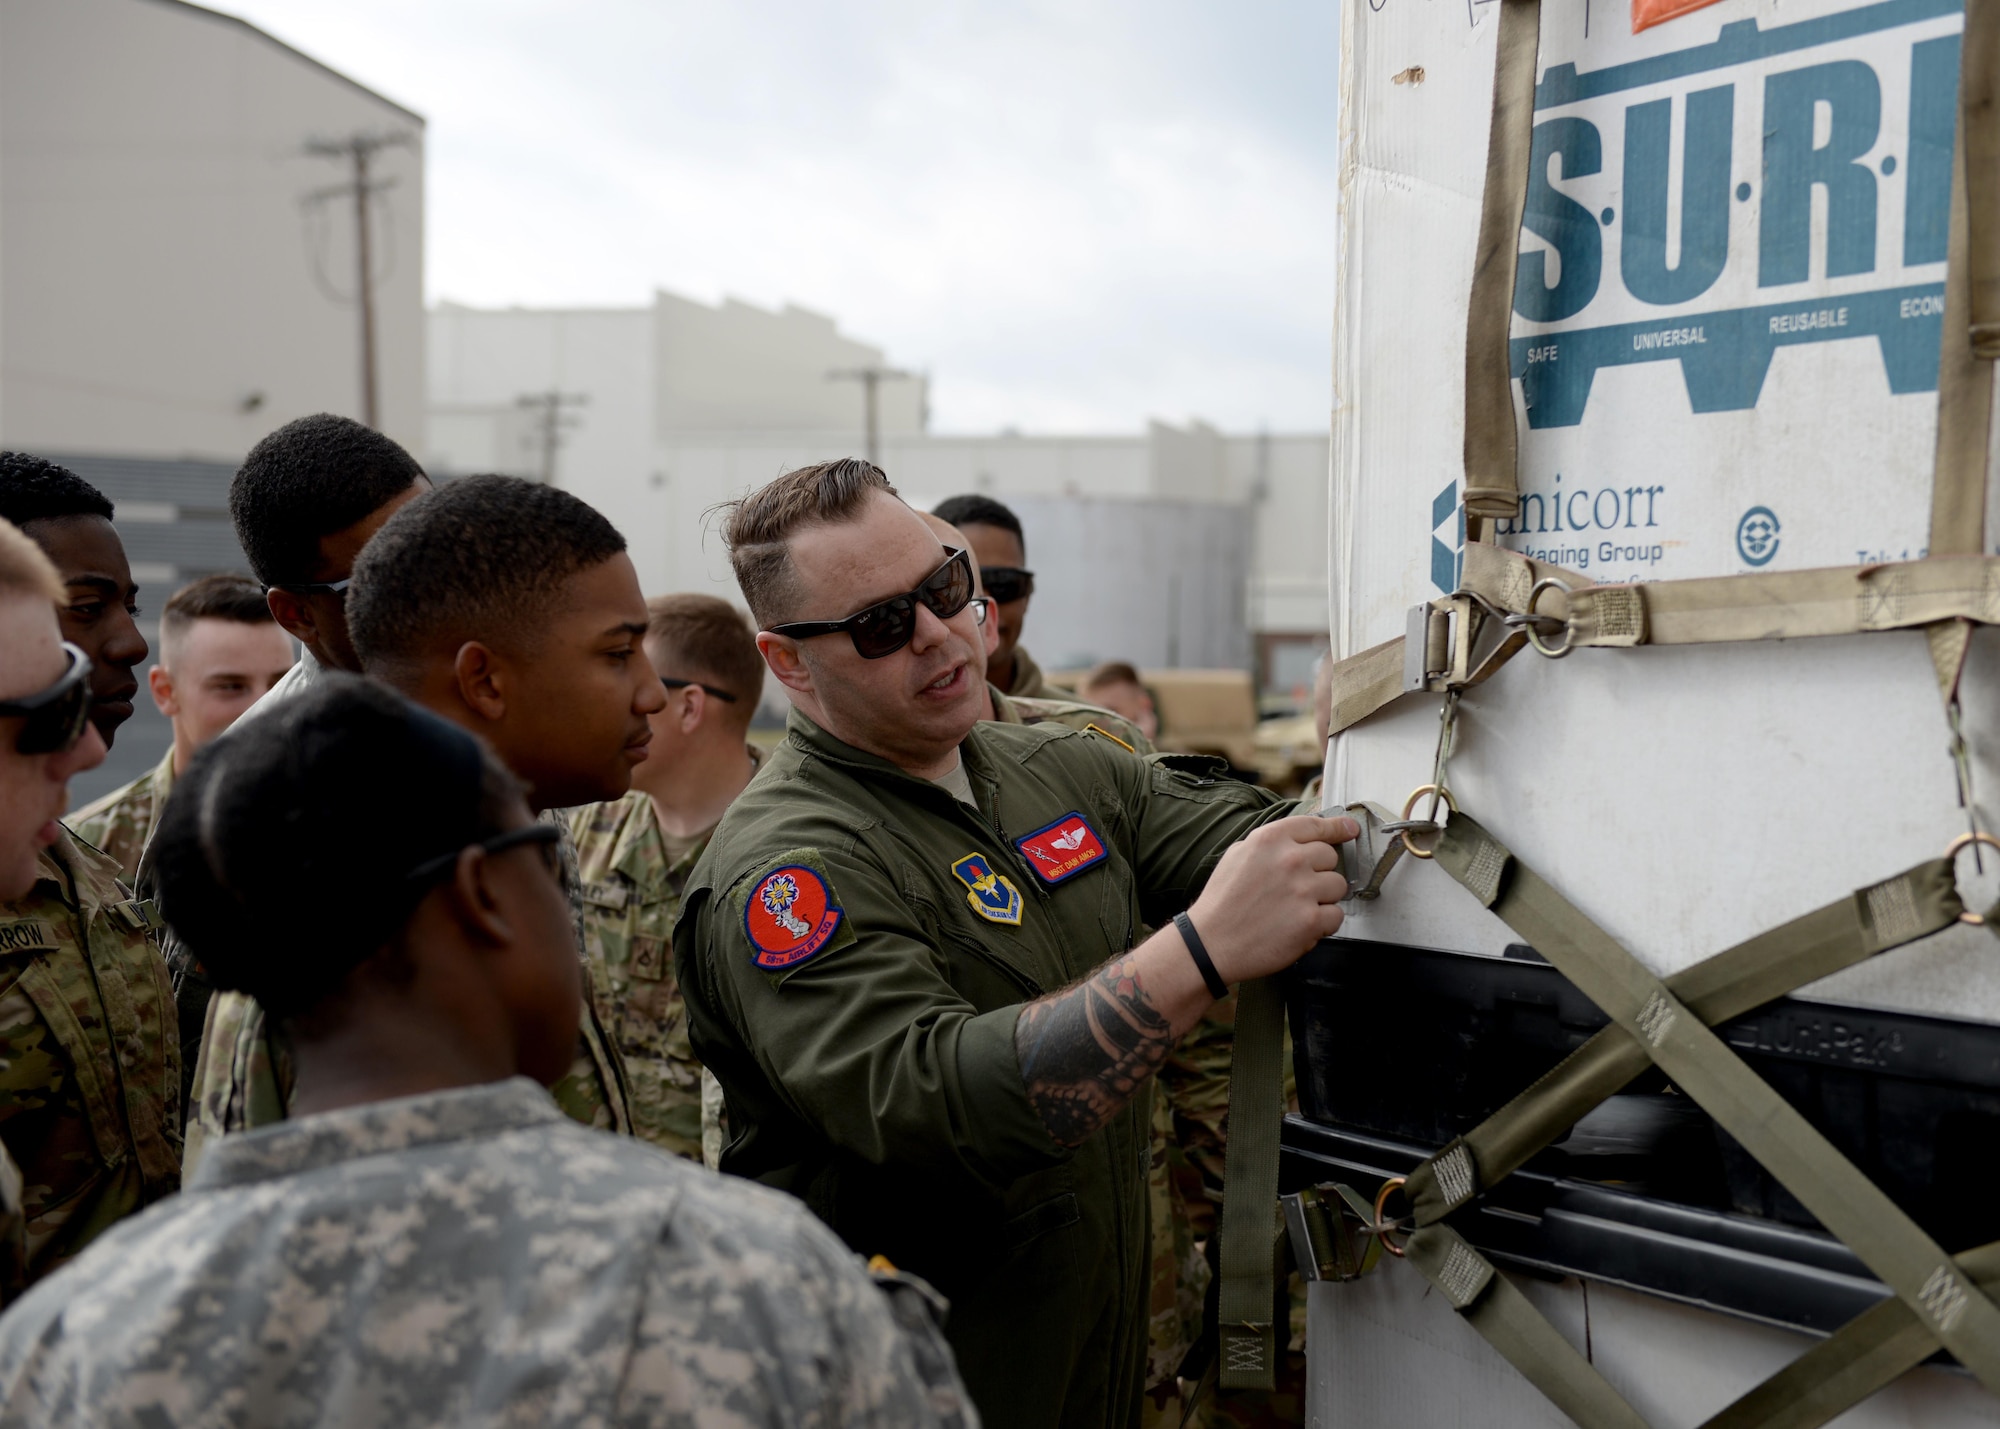 U.S. Air Force Master Sgt. Edwin Amos (center), 58th Airlift Squadron instructor loadmaster, provides instruction to U.S. Army Soldiers assigned to the 578th Forward Support Company at Fort Sill, Oklahoma, on securing a cargo pallet, March 23, 2017, at Altus Air Force Base, Oklahoma. The soldiers came to Altus AFB to learn how to secure cargo pallets and vehicles to a U.S. Air Force C-17 Globemaster III cargo aircrafts. (U.S. Air Force photo by Airman 1st Class Jackson N. Haddon/Released).